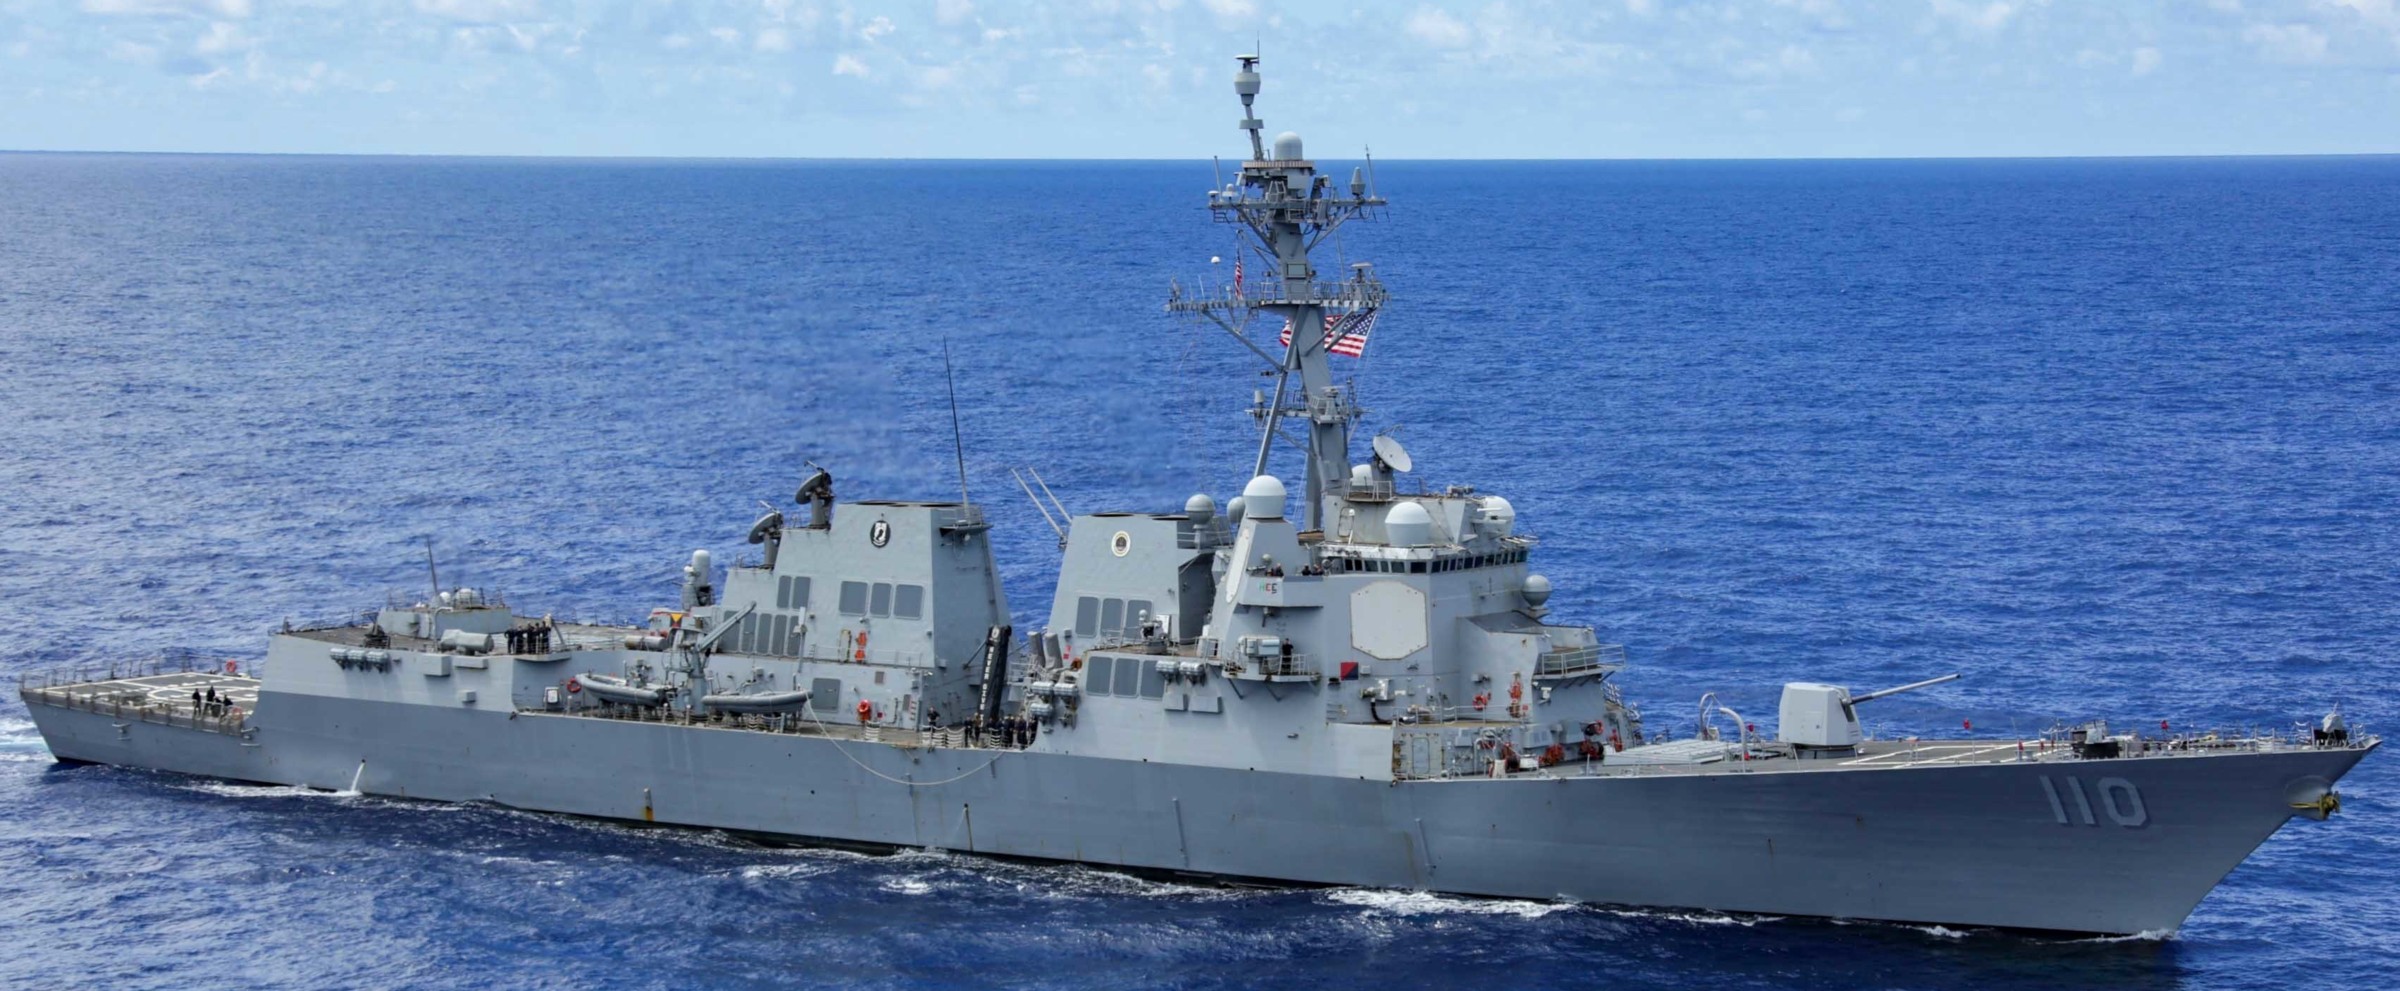 ddg-110 uss william p. lawrence arleigh burke class guided missile destroyer aegis us navy exercise rimpac 2022 87